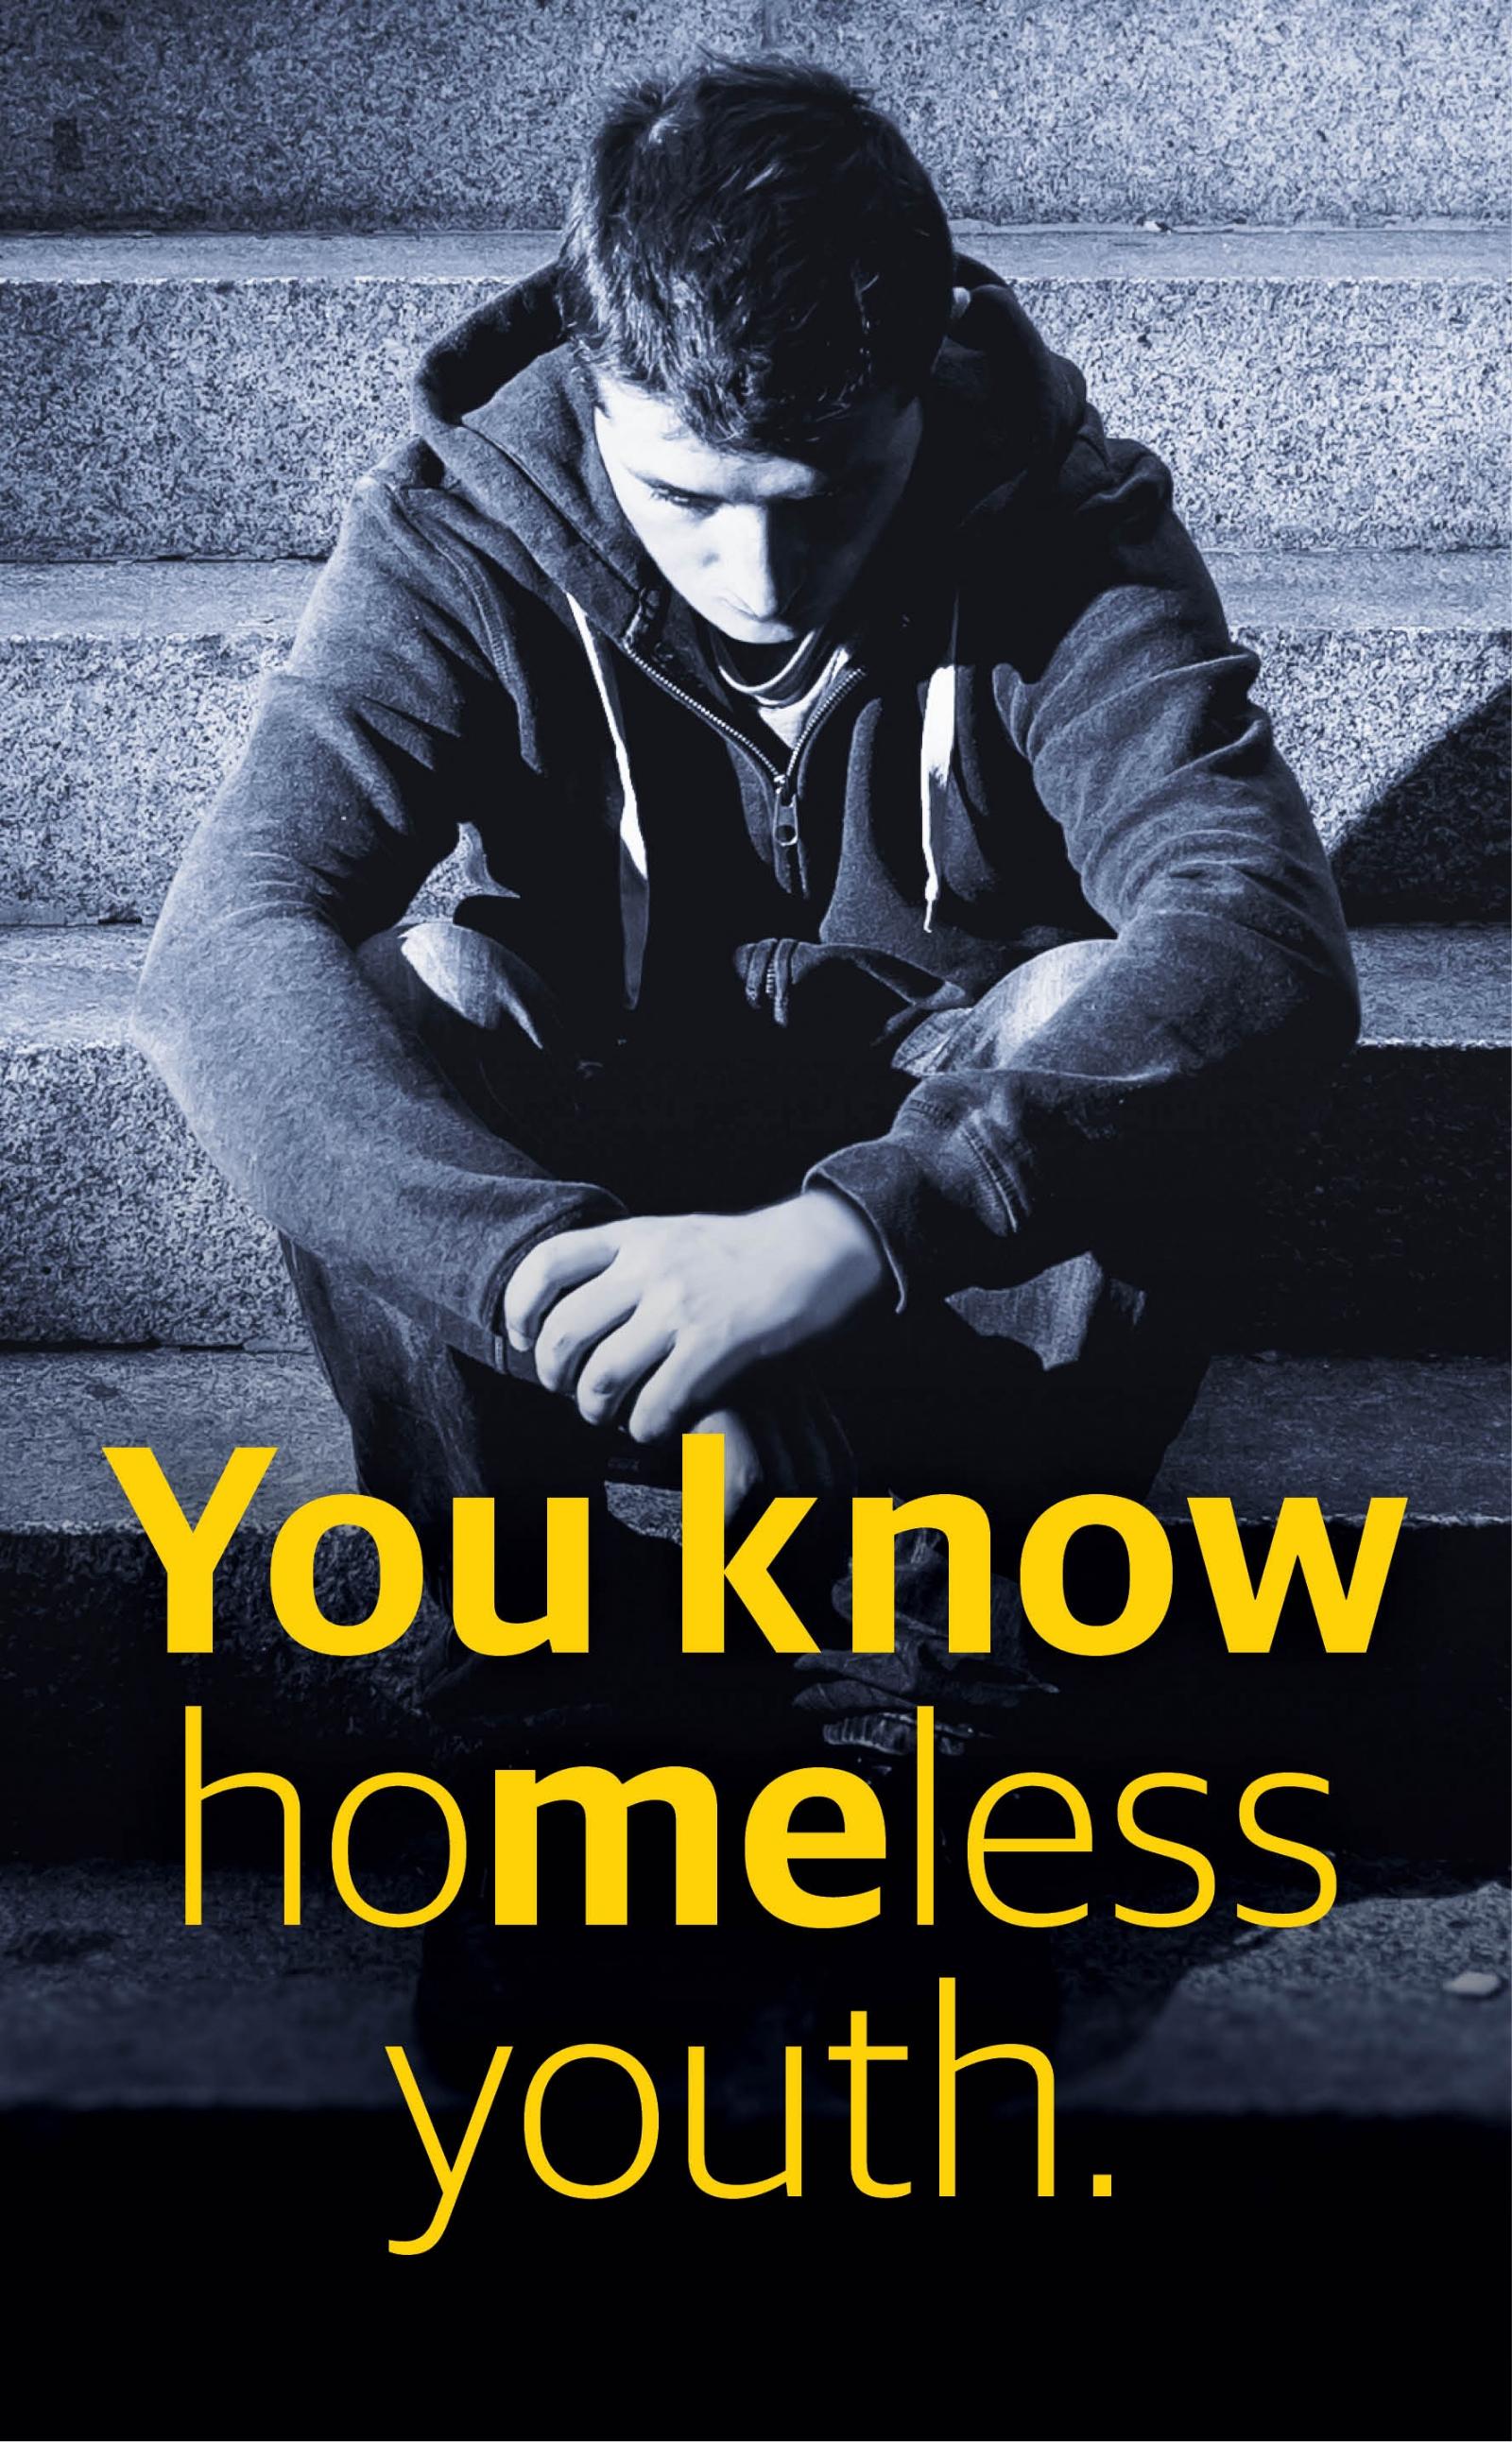 Black and white image of a young man sitting on steps thinking, with the text: You know homeless youth